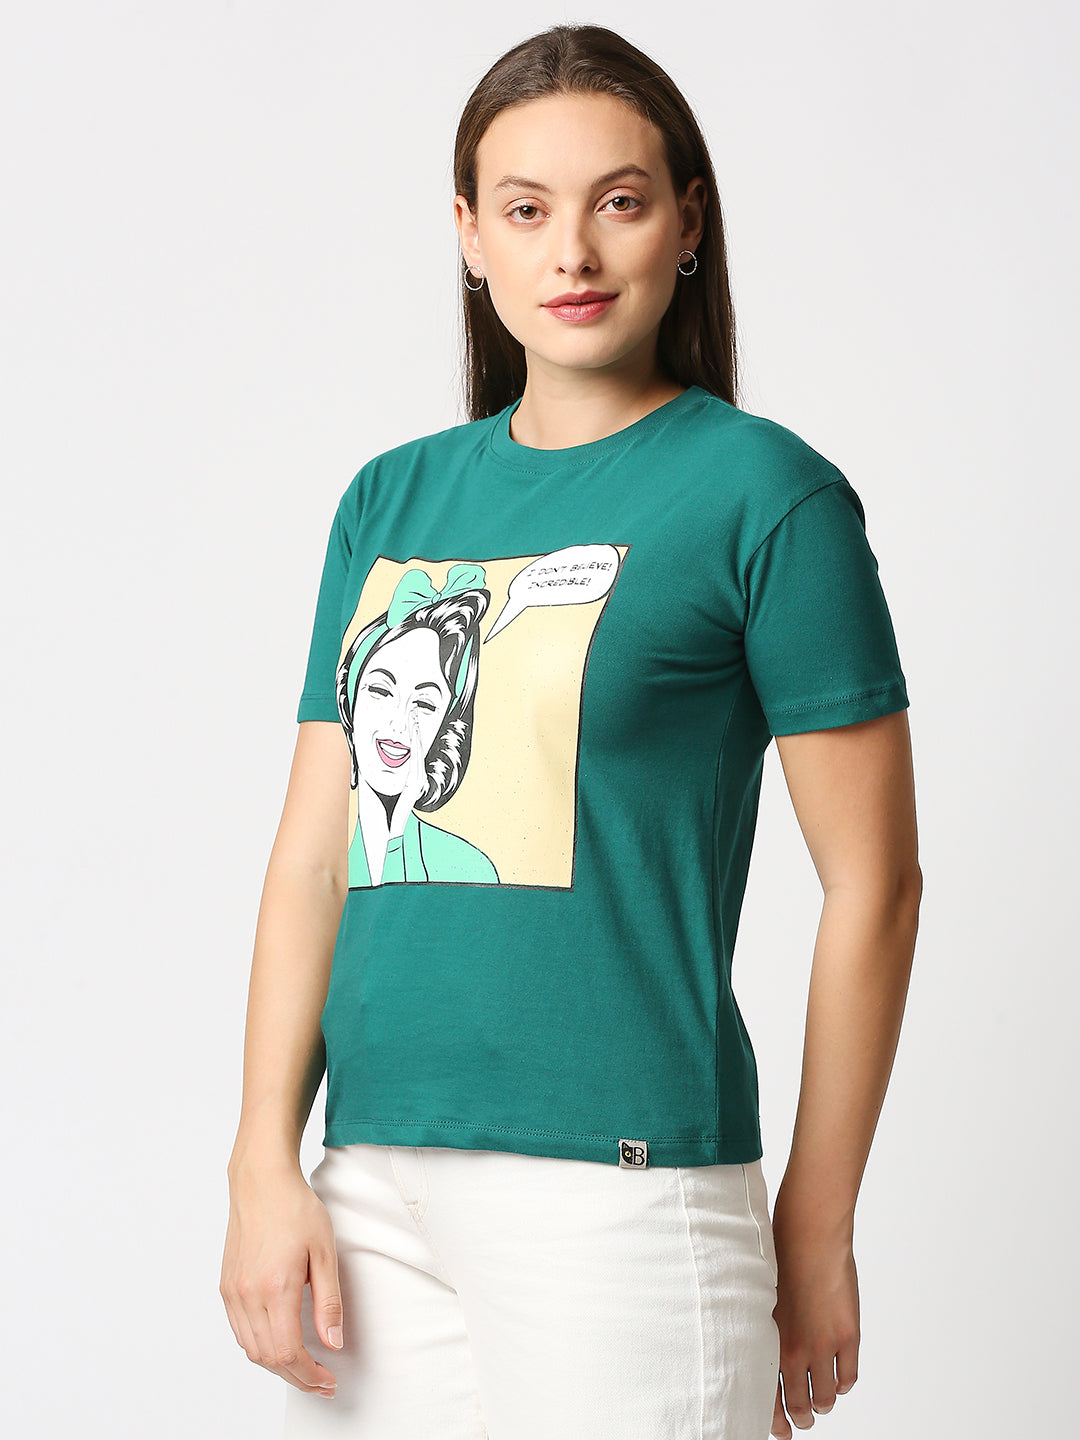 Buy Women's Green Comfort fit T-shirt with chest Print